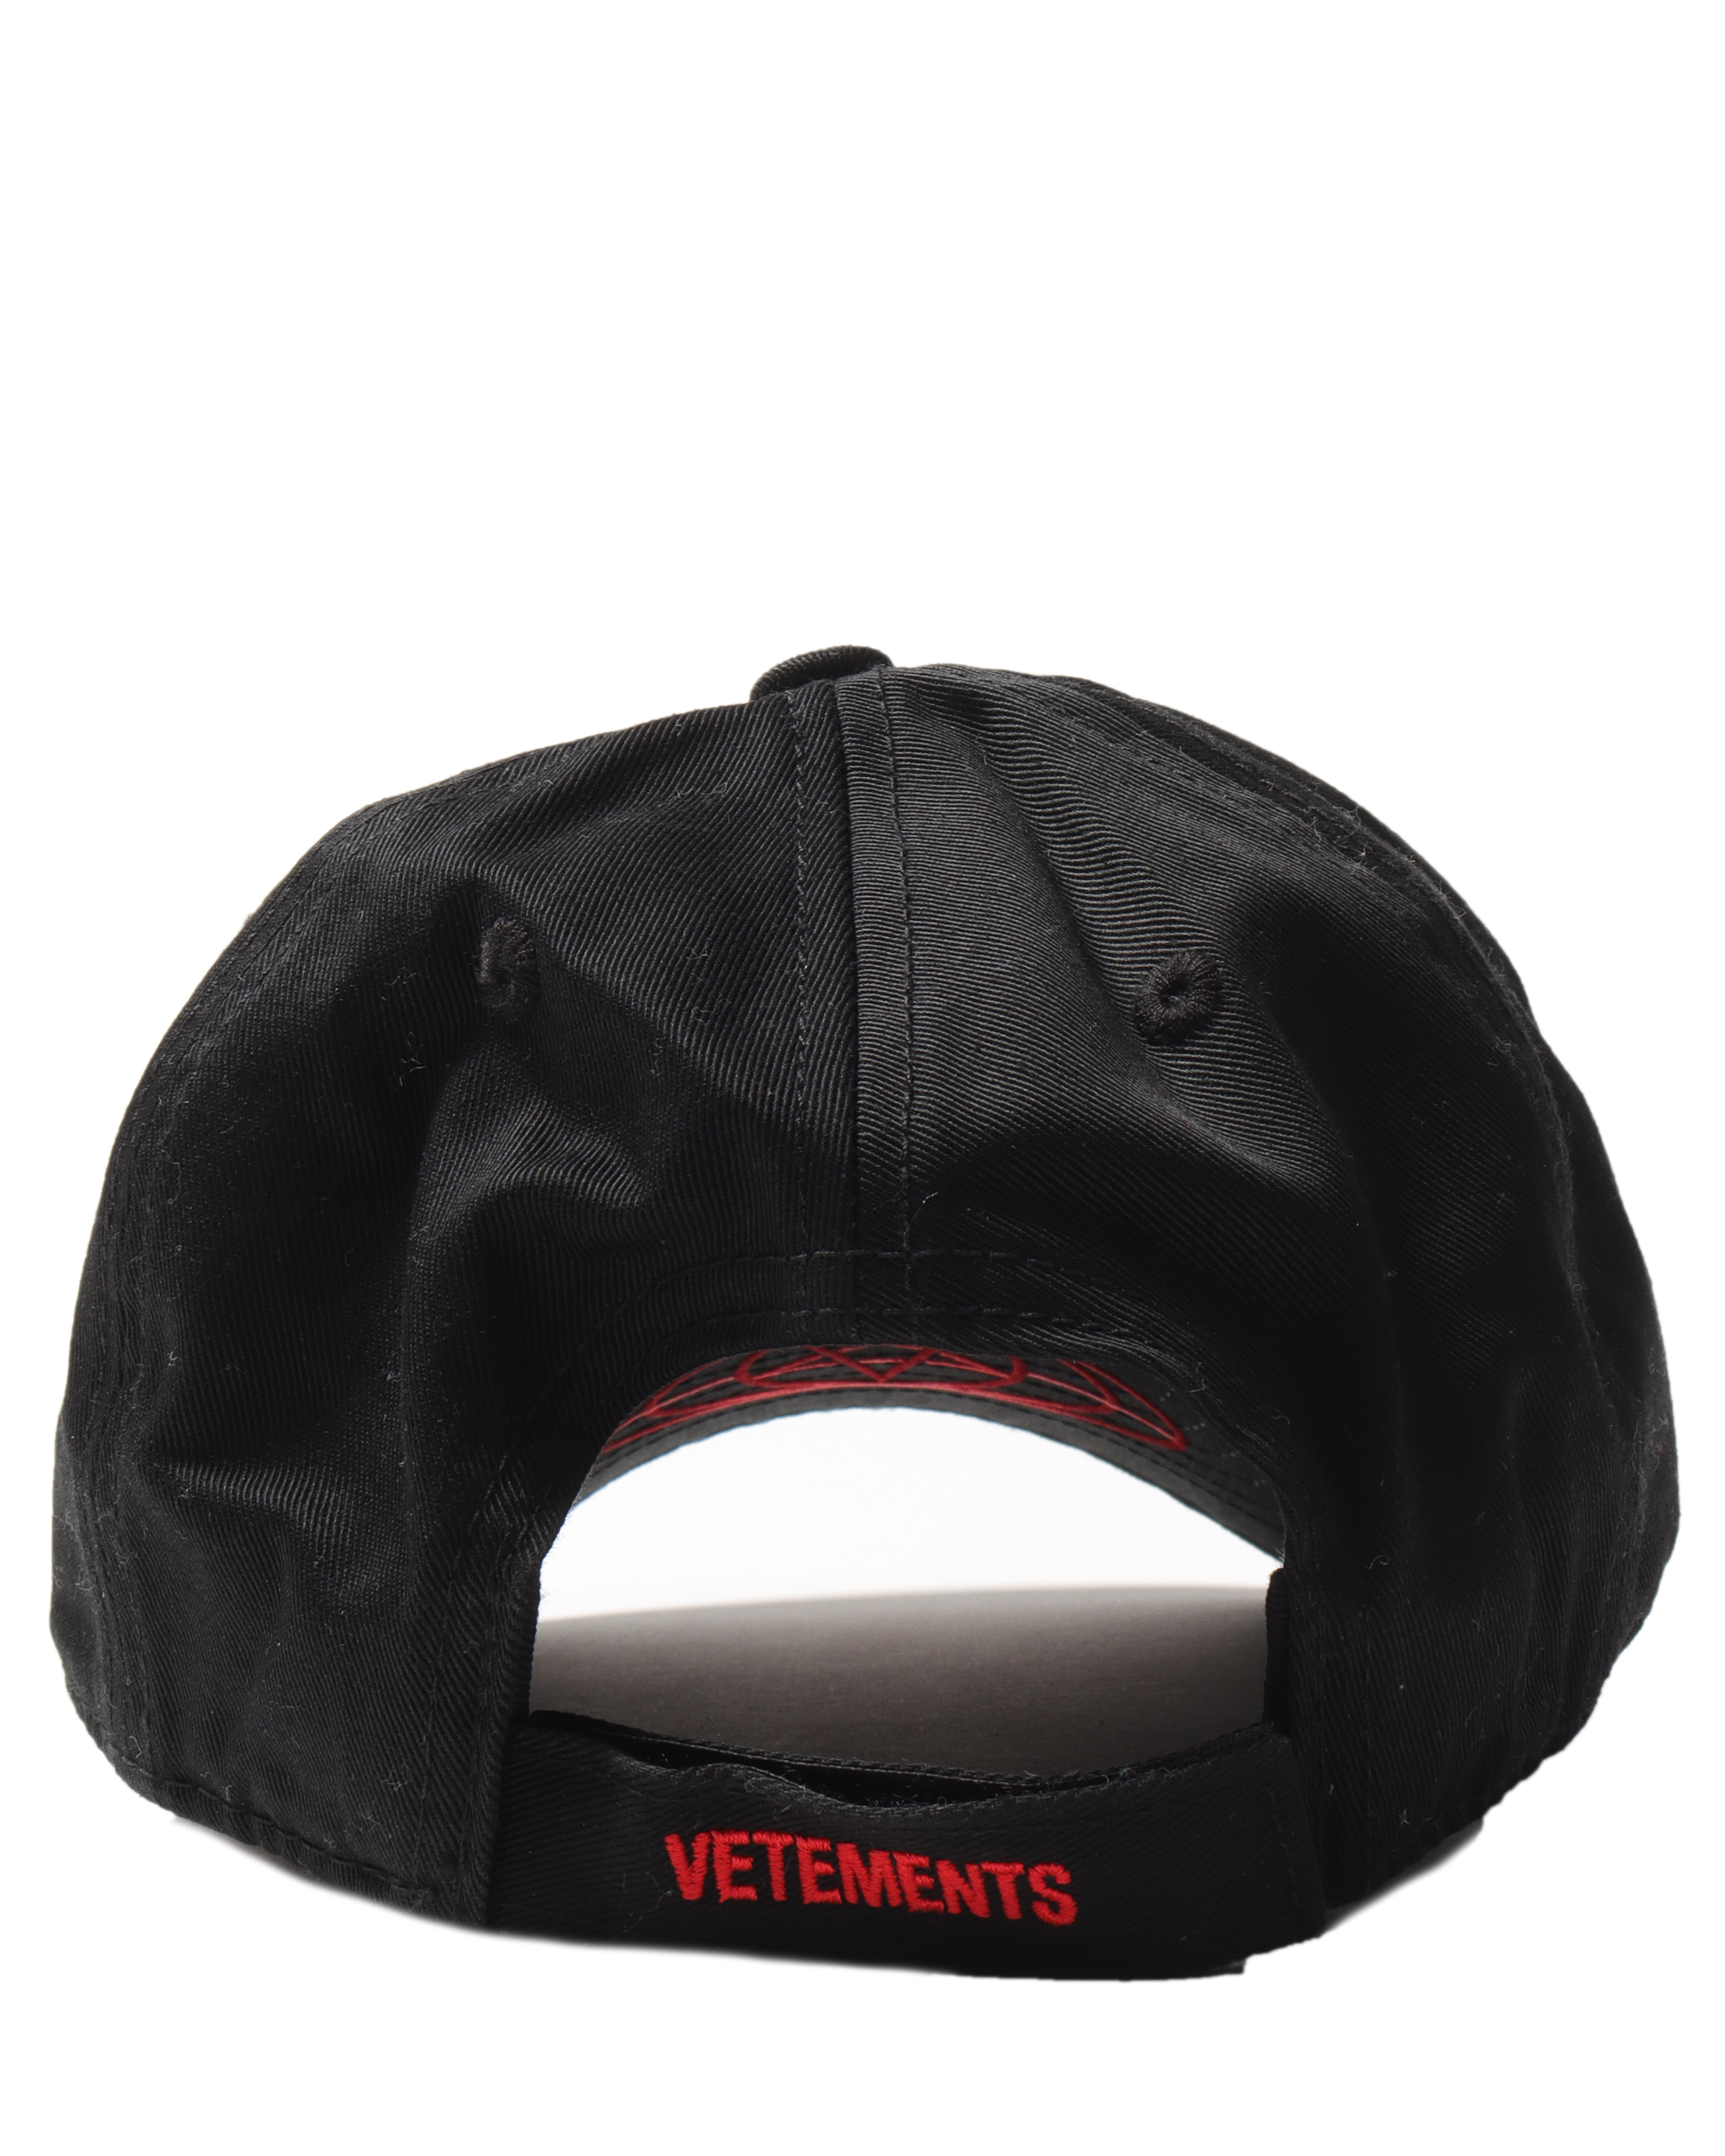 "RESTRICTED" Embroidered Hat